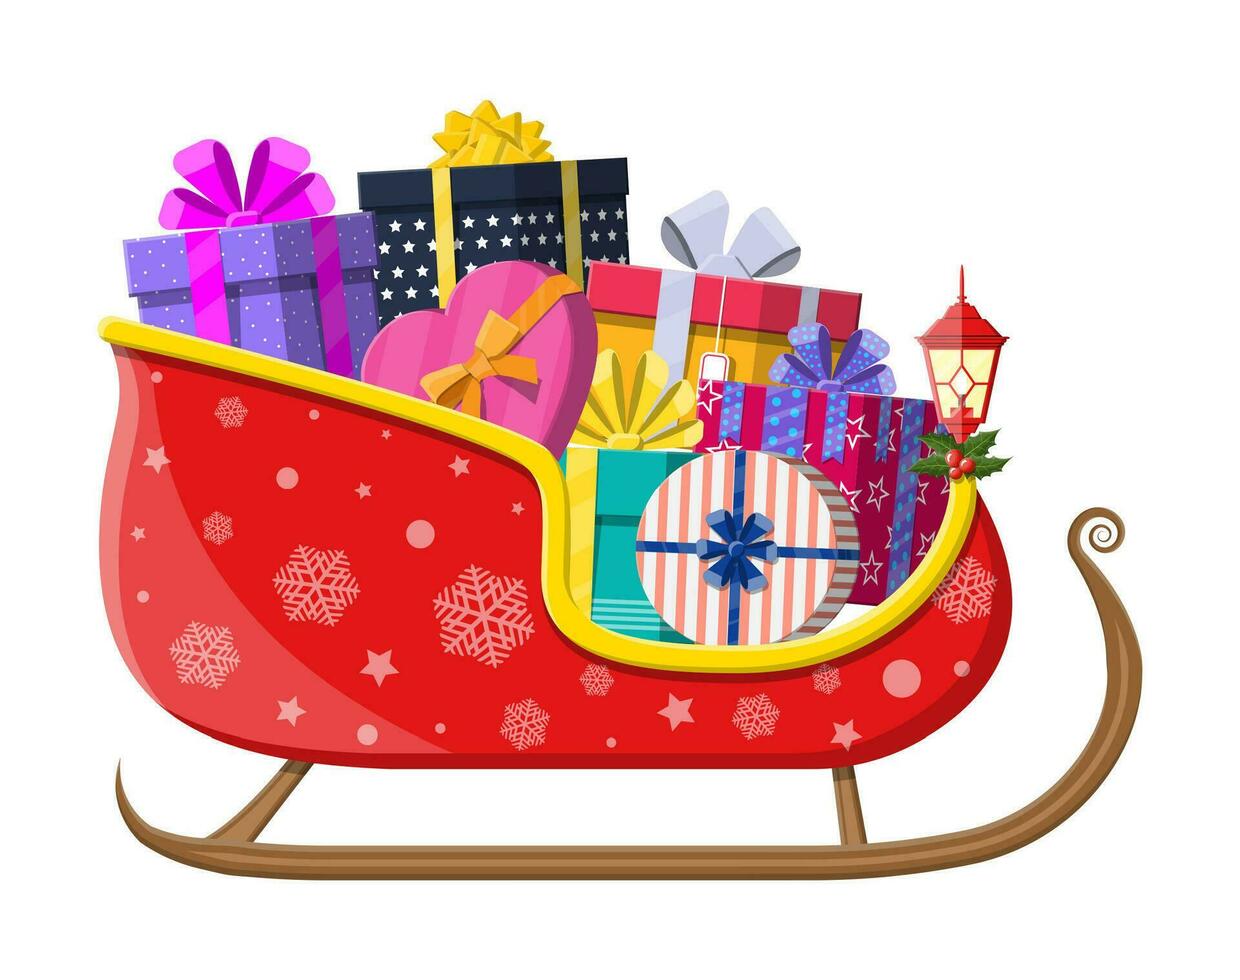 Santa claus sleigh with gifts boxes with bows. Happy new year decoration. Merry christmas holiday. New year and xmas celebration. Vector illustration in flat style